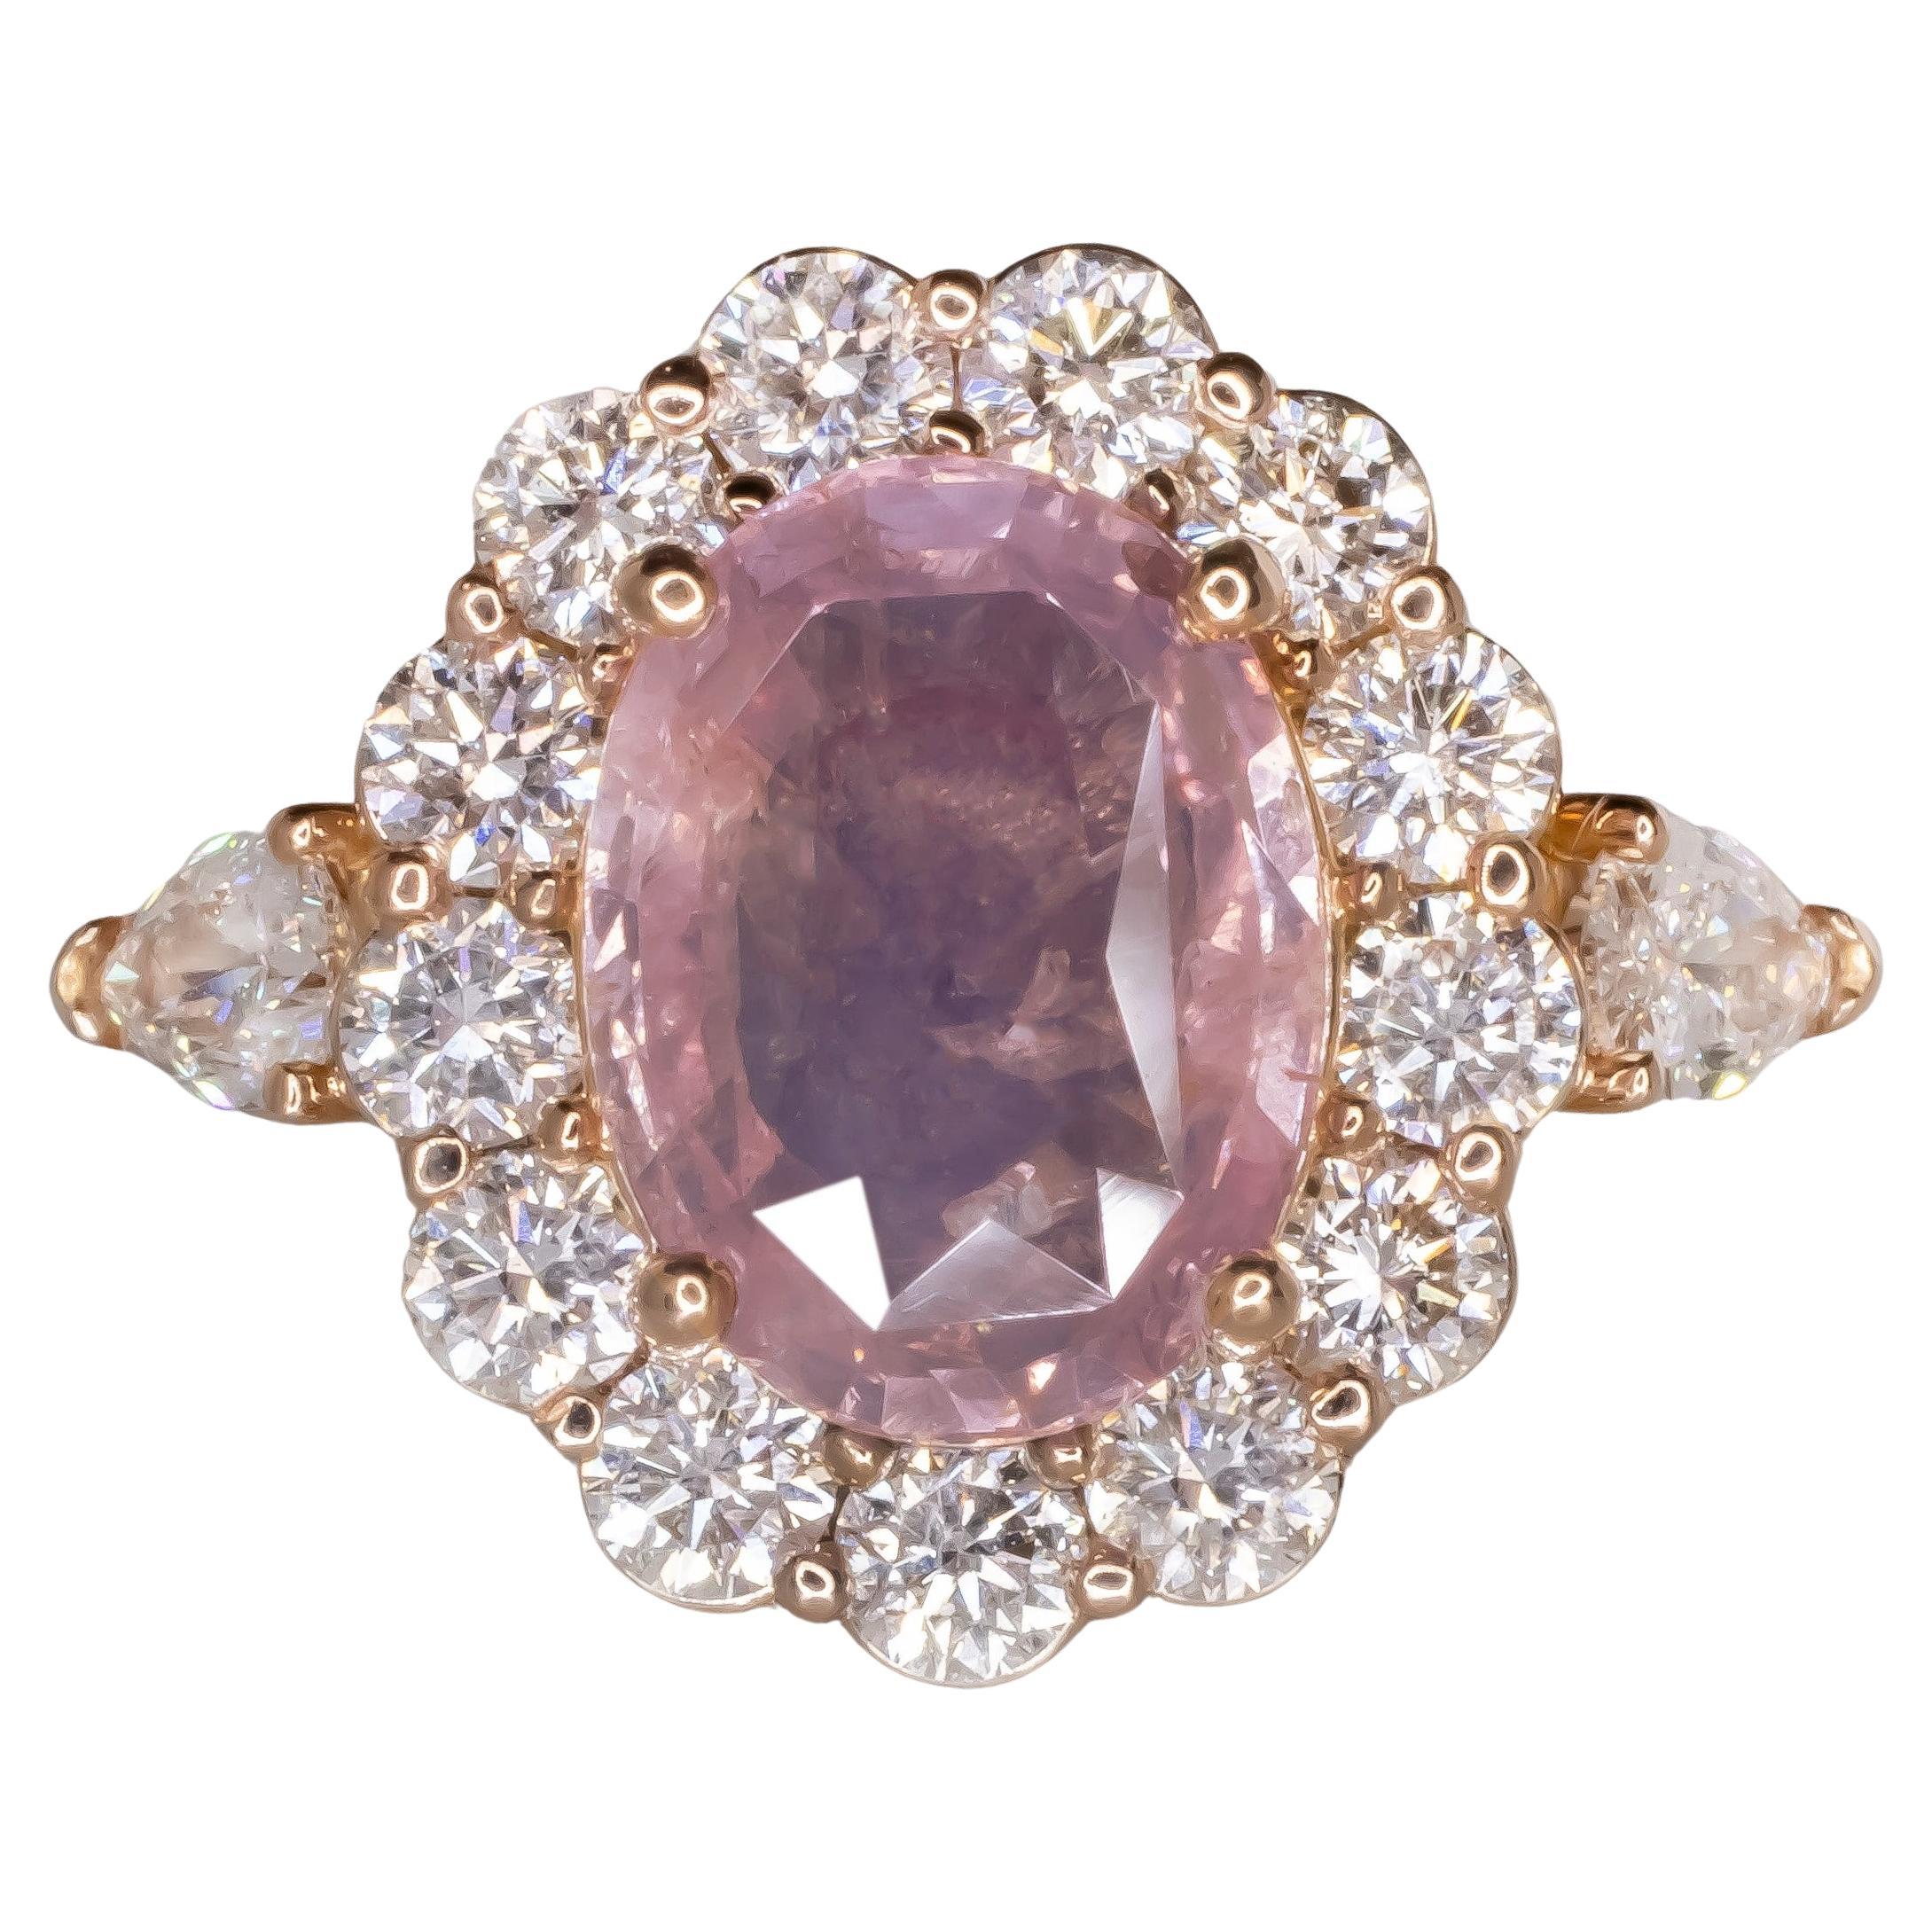 IGI Certified 4.02 Carat Oval Unheated Padparadscha Sapphire 18K Rose Gold Ring For Sale